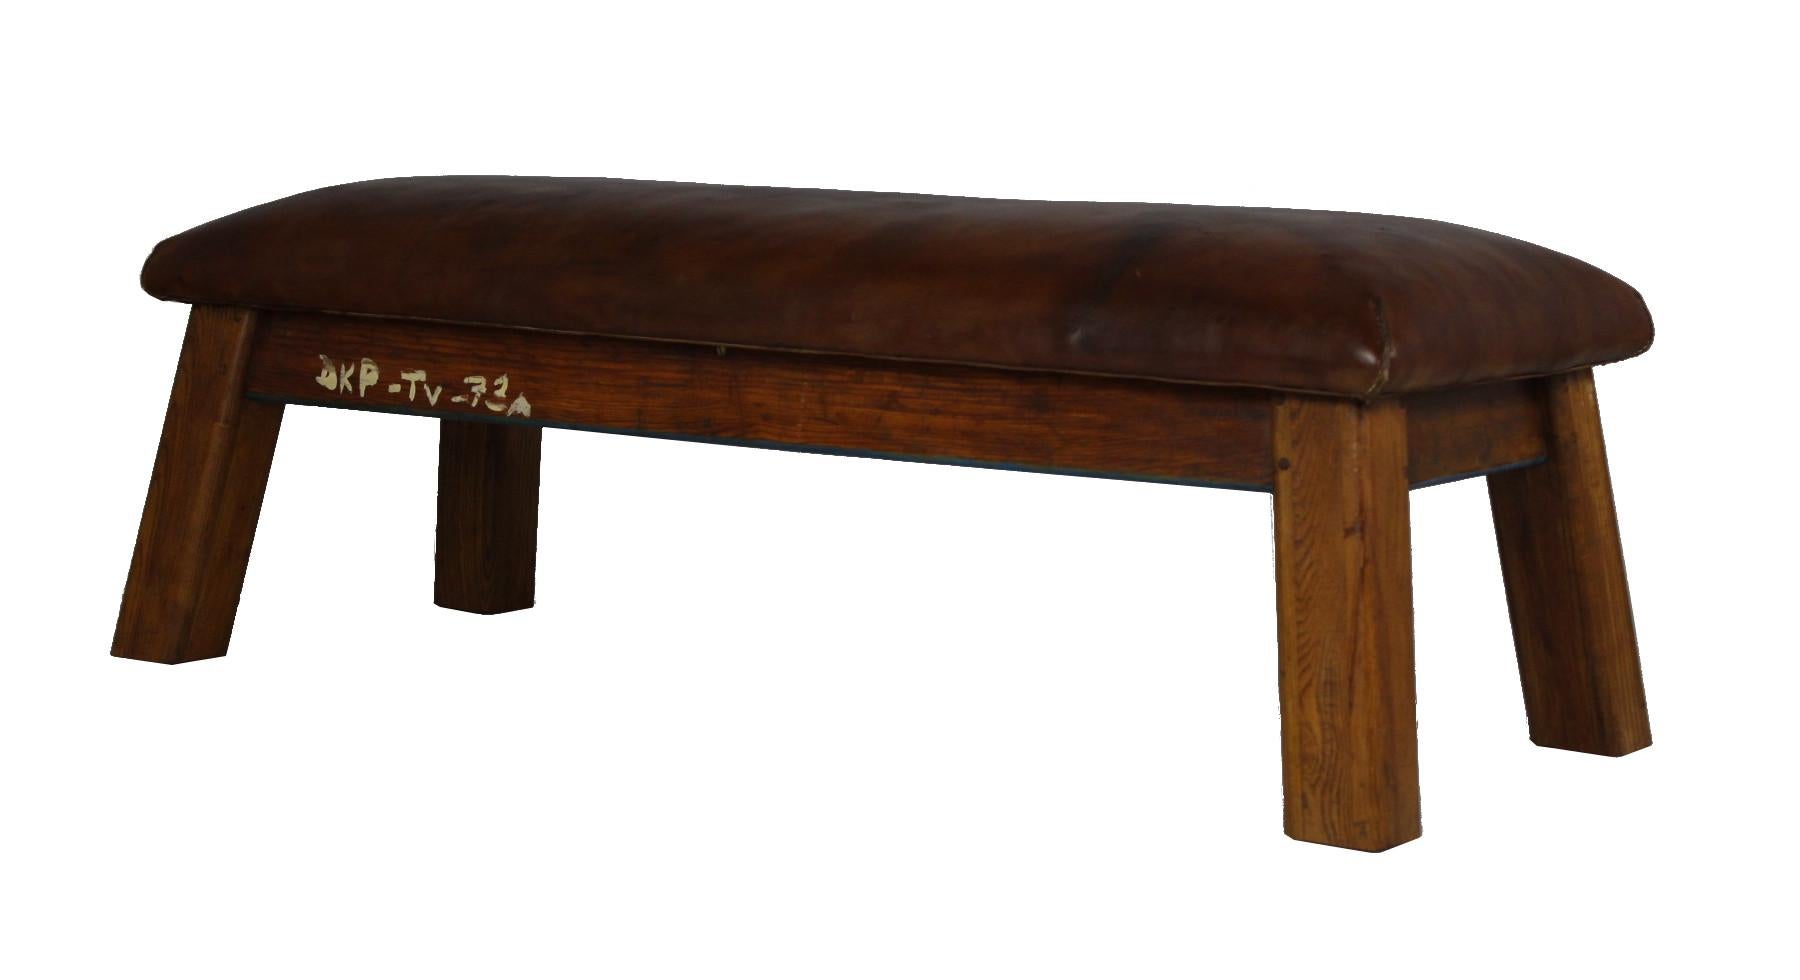 Leather gym bench from the 1930s. The top is made from thick leather, wooden legs. The bench is in very good original condition.